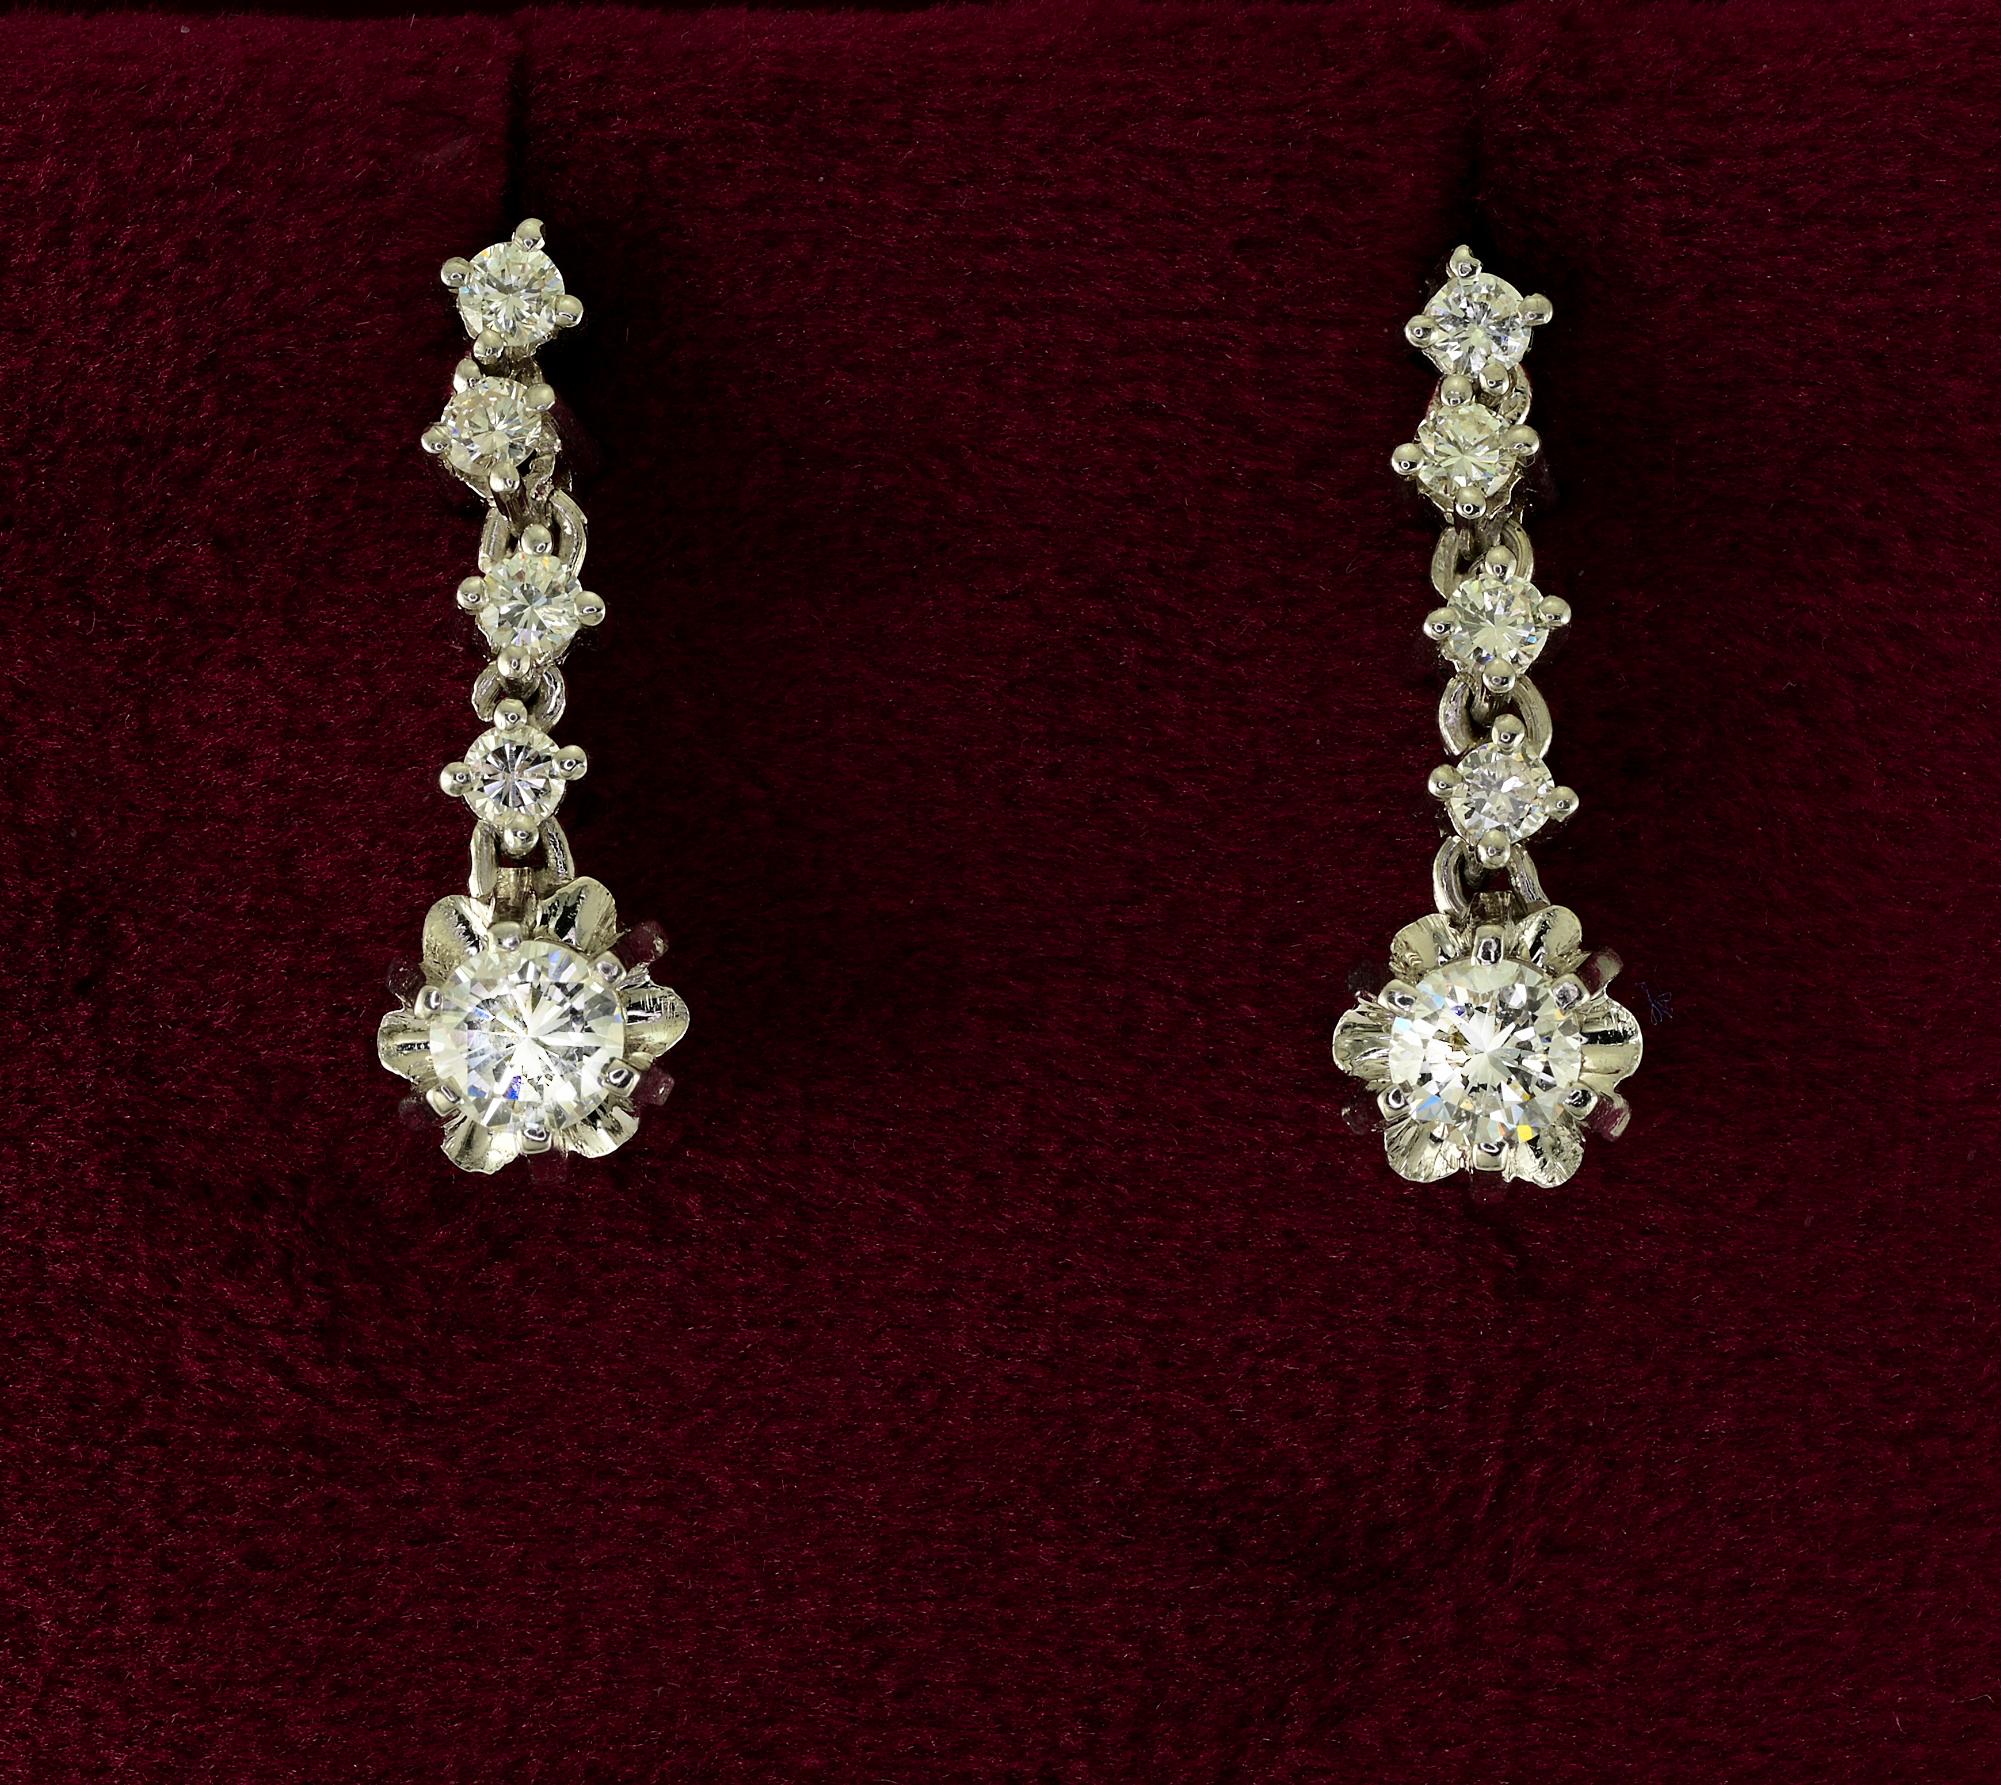 These lovely pair of Diamond drop earrings are 1950 ca
Classy timeless style hand crafted of solid 18 KT gold
Designed with a simple line of bright white Diamonds leading to the main Diamond which is larger in size and set in a flower head